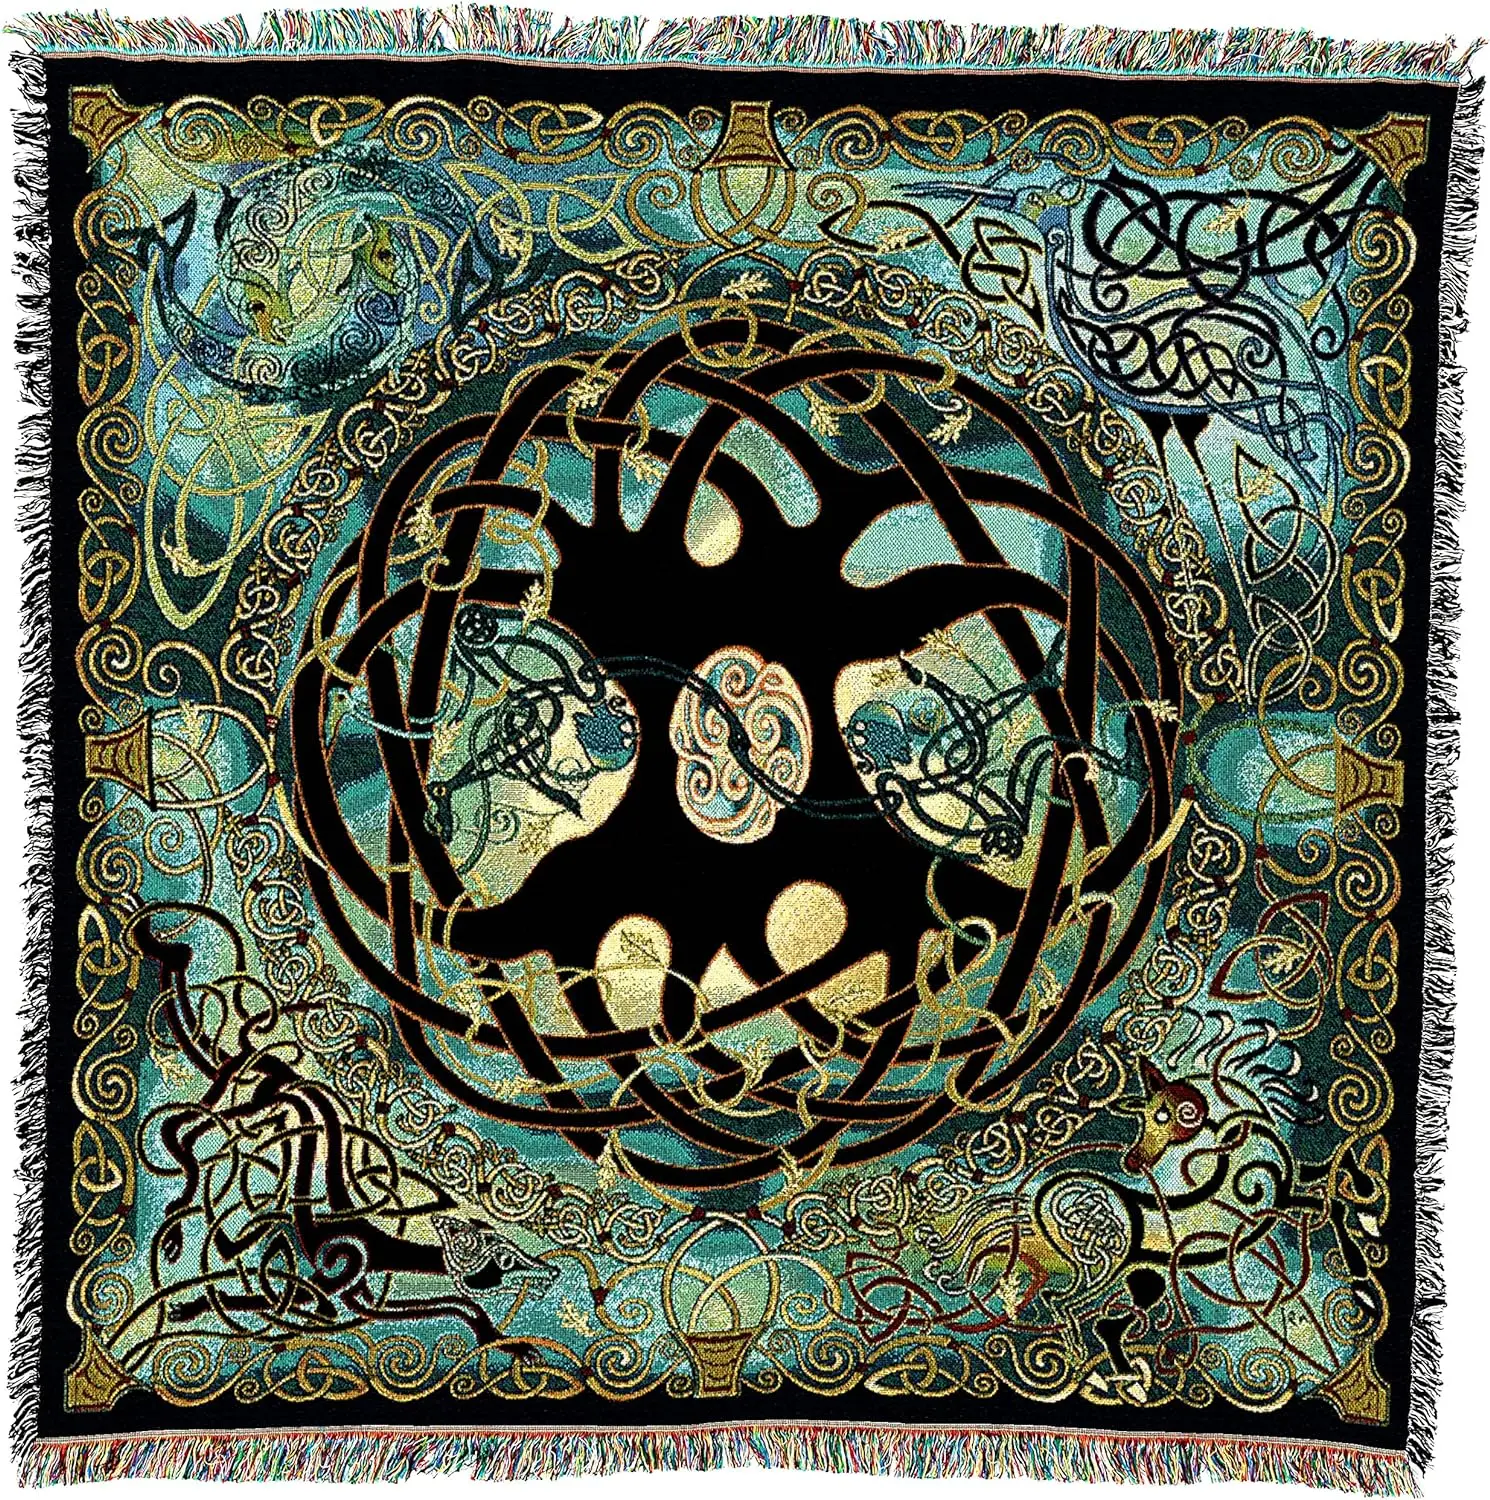 

Tree of Life by Jen Delyth - Gift Lap Square Tapestry Throw Woven from Cotton - The USA (54x54) Rug Oshi no ko Straykids blank